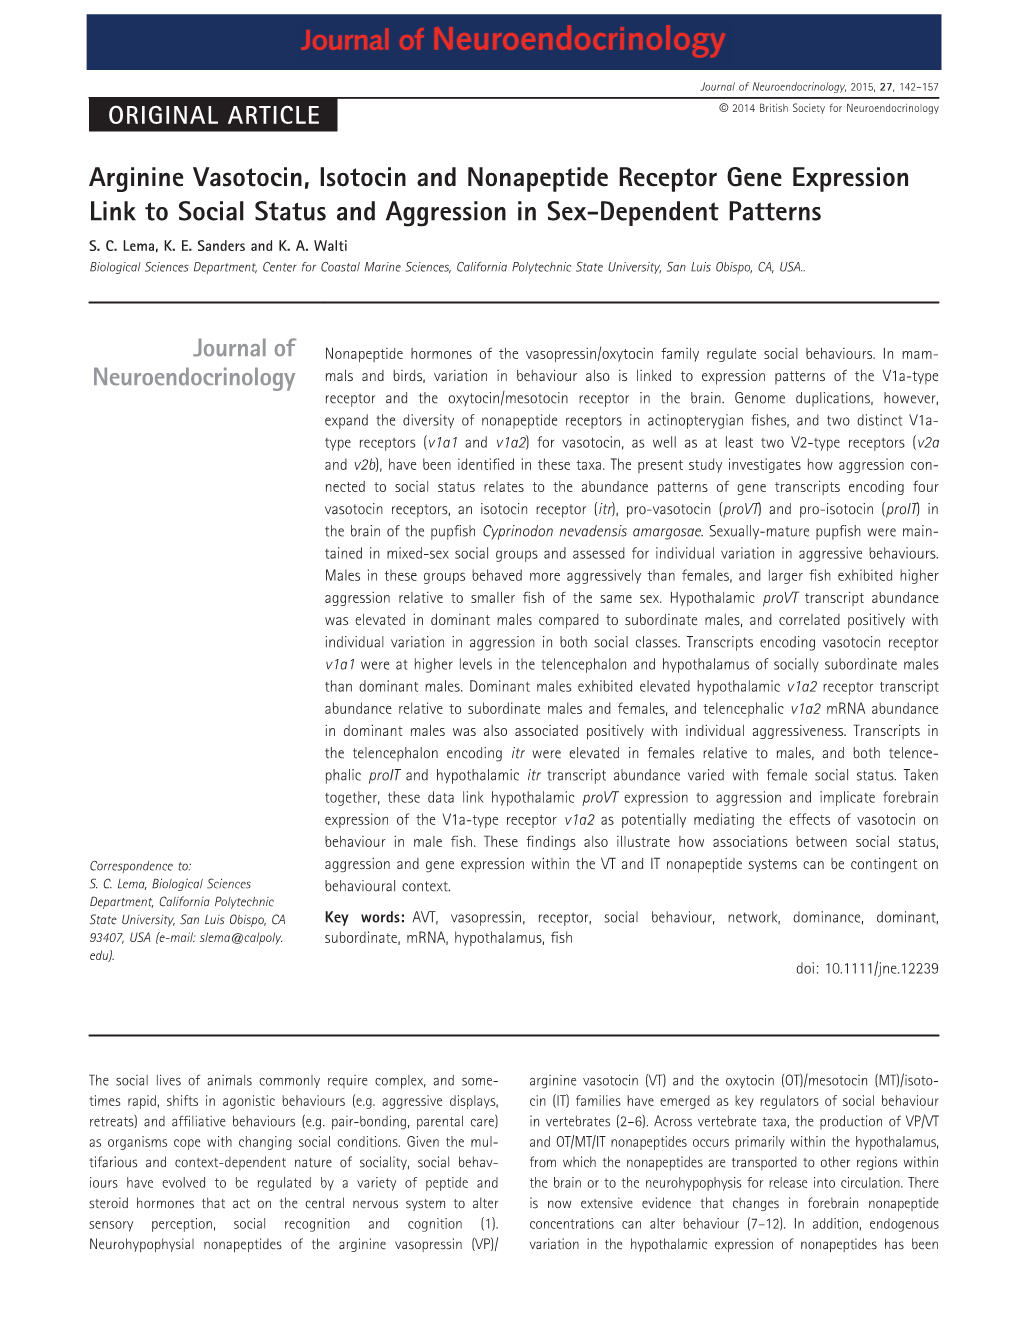 Arginine Vasotocin, Isotocin and Nonapeptide Receptor Gene Expression Link to Social Status and Aggression in Sex-Dependent Patterns S